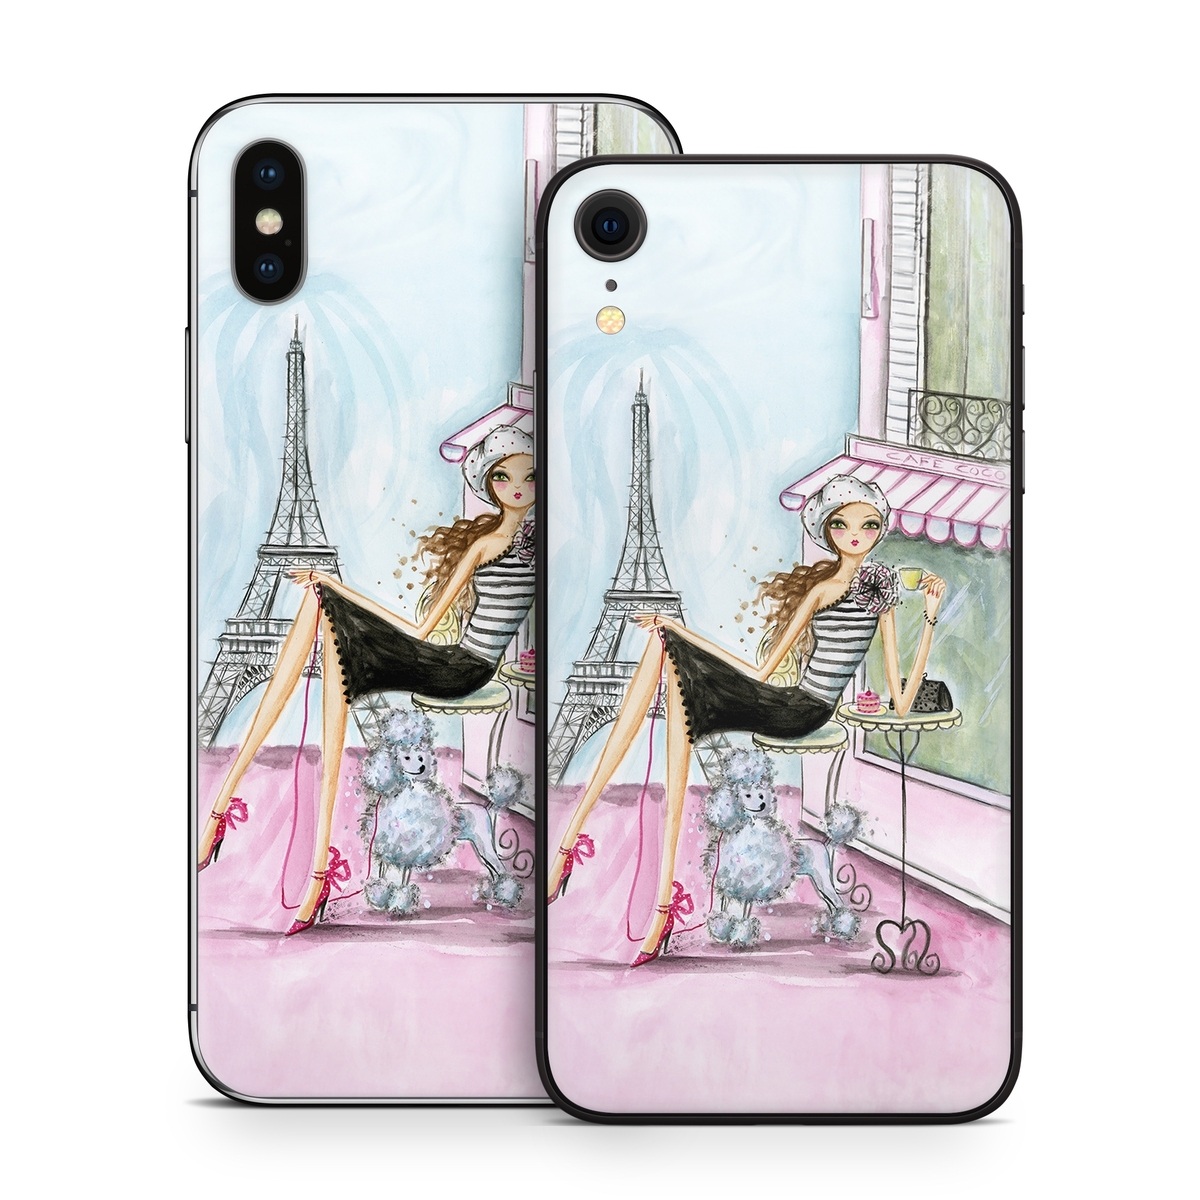 iPhone XS Skin design of Pink, Illustration, Sitting, Konghou, Watercolor paint, Fashion illustration, Art, Drawing, Style, with gray, purple, blue, black, pink colors